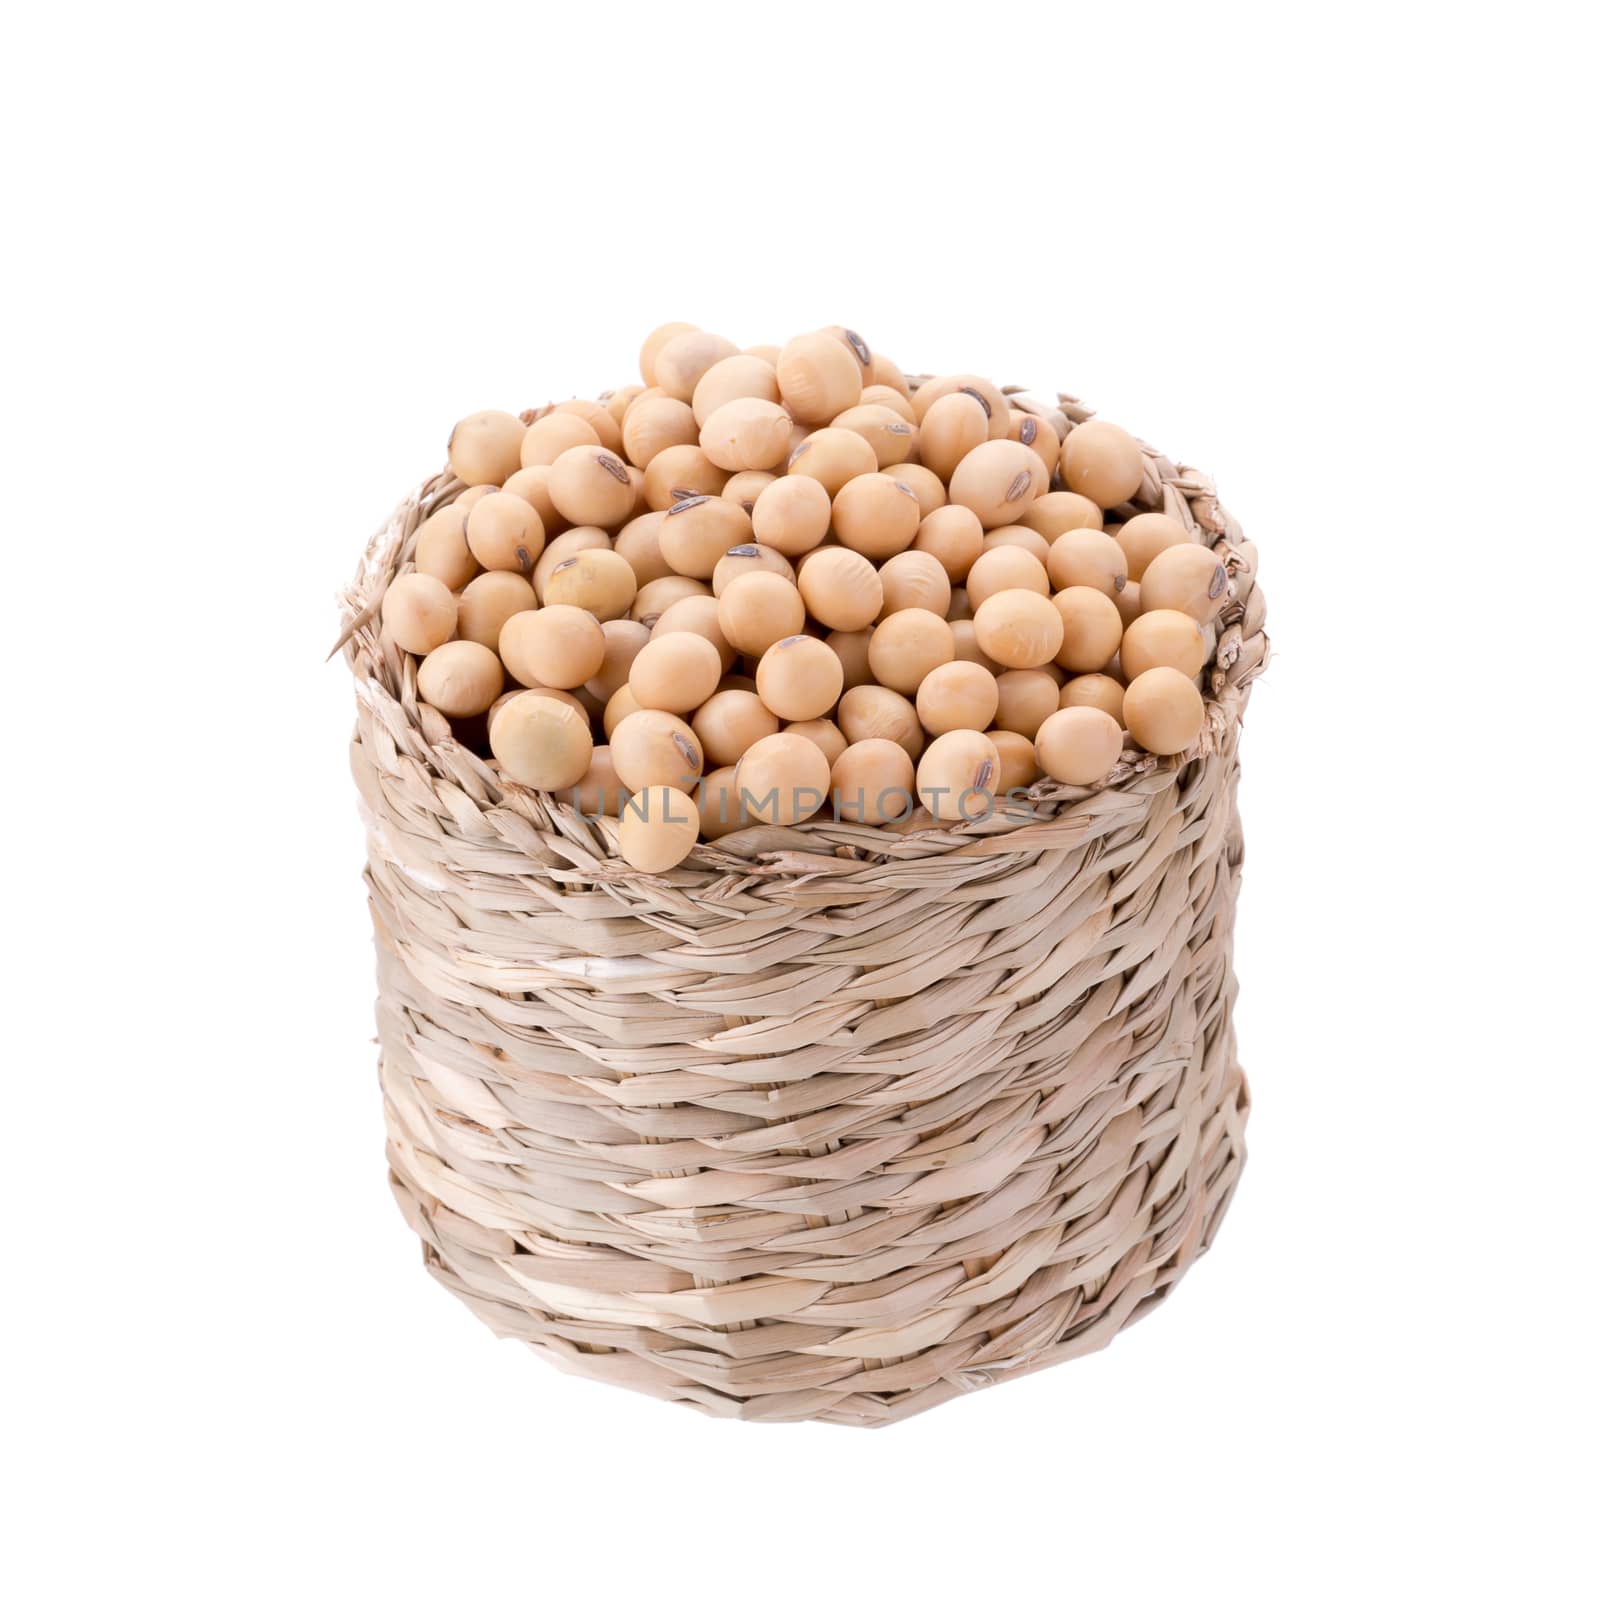 soybeans in basket isolated on white background.